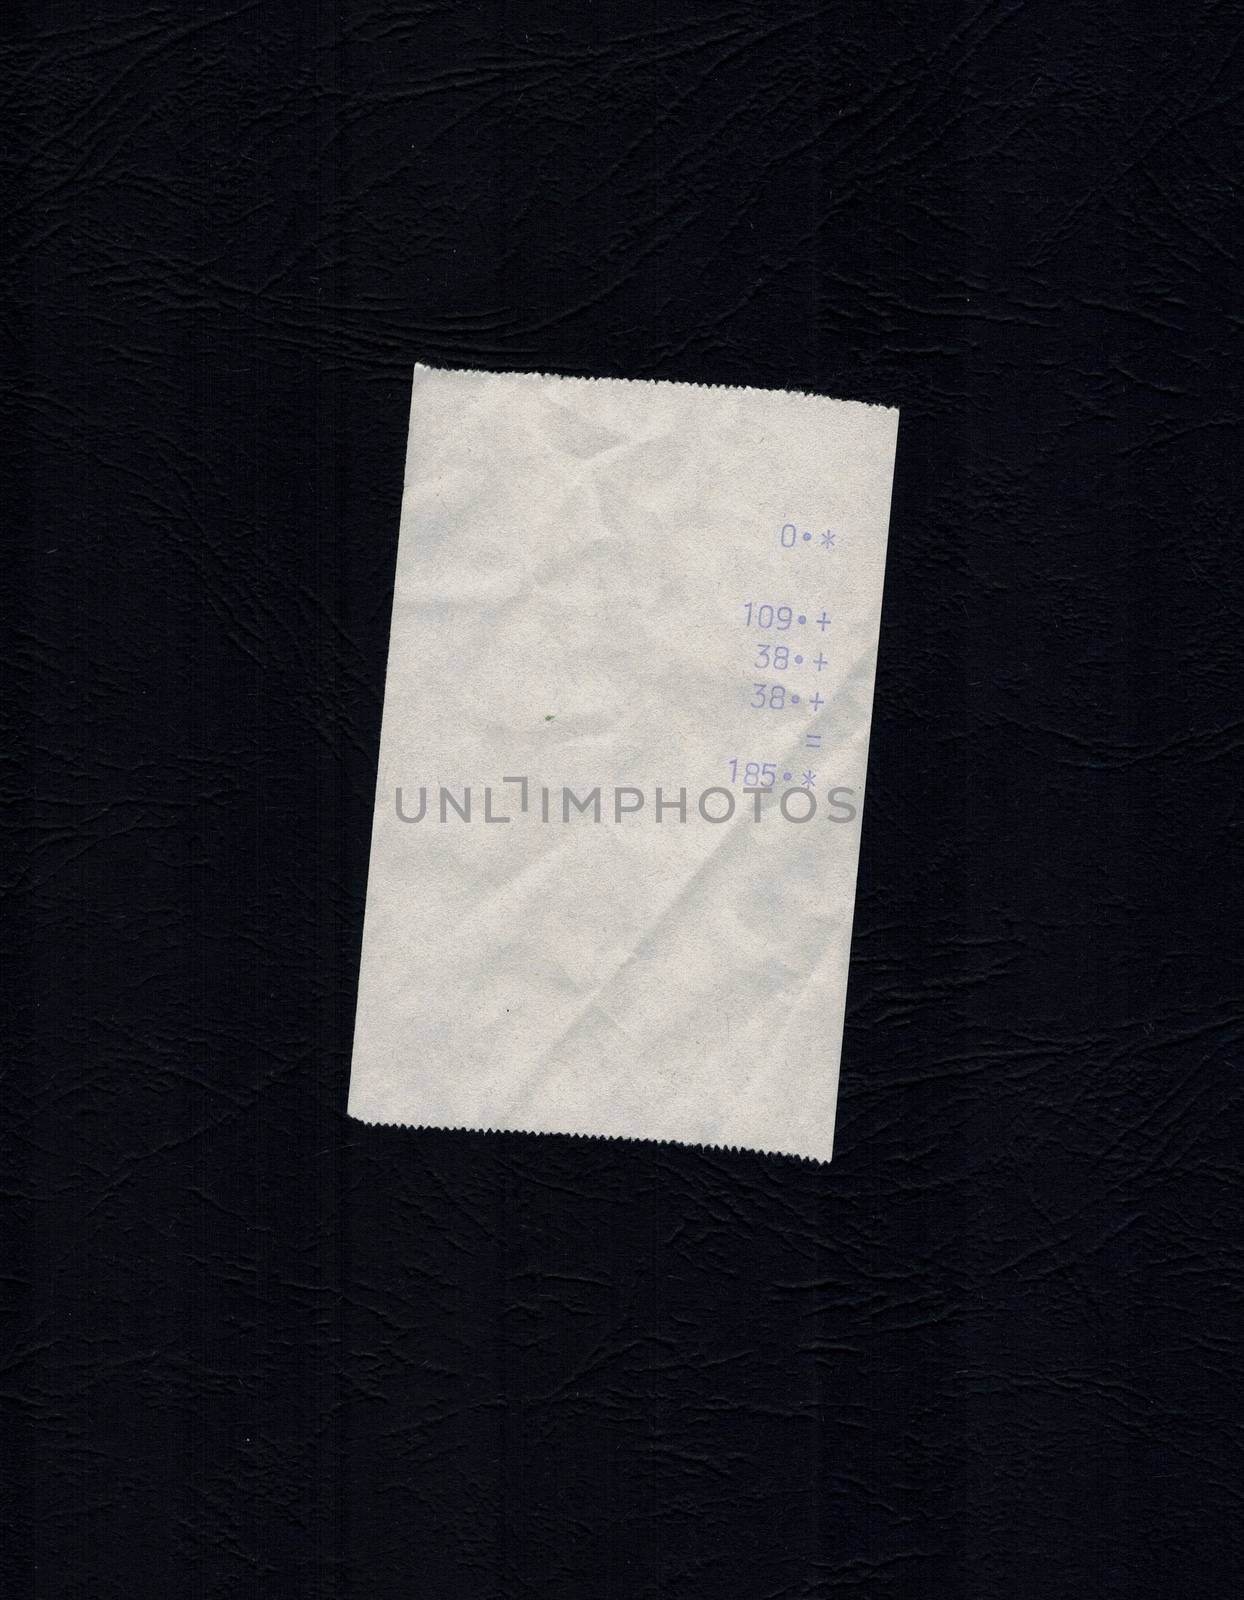 bill or receipt isolated over black background